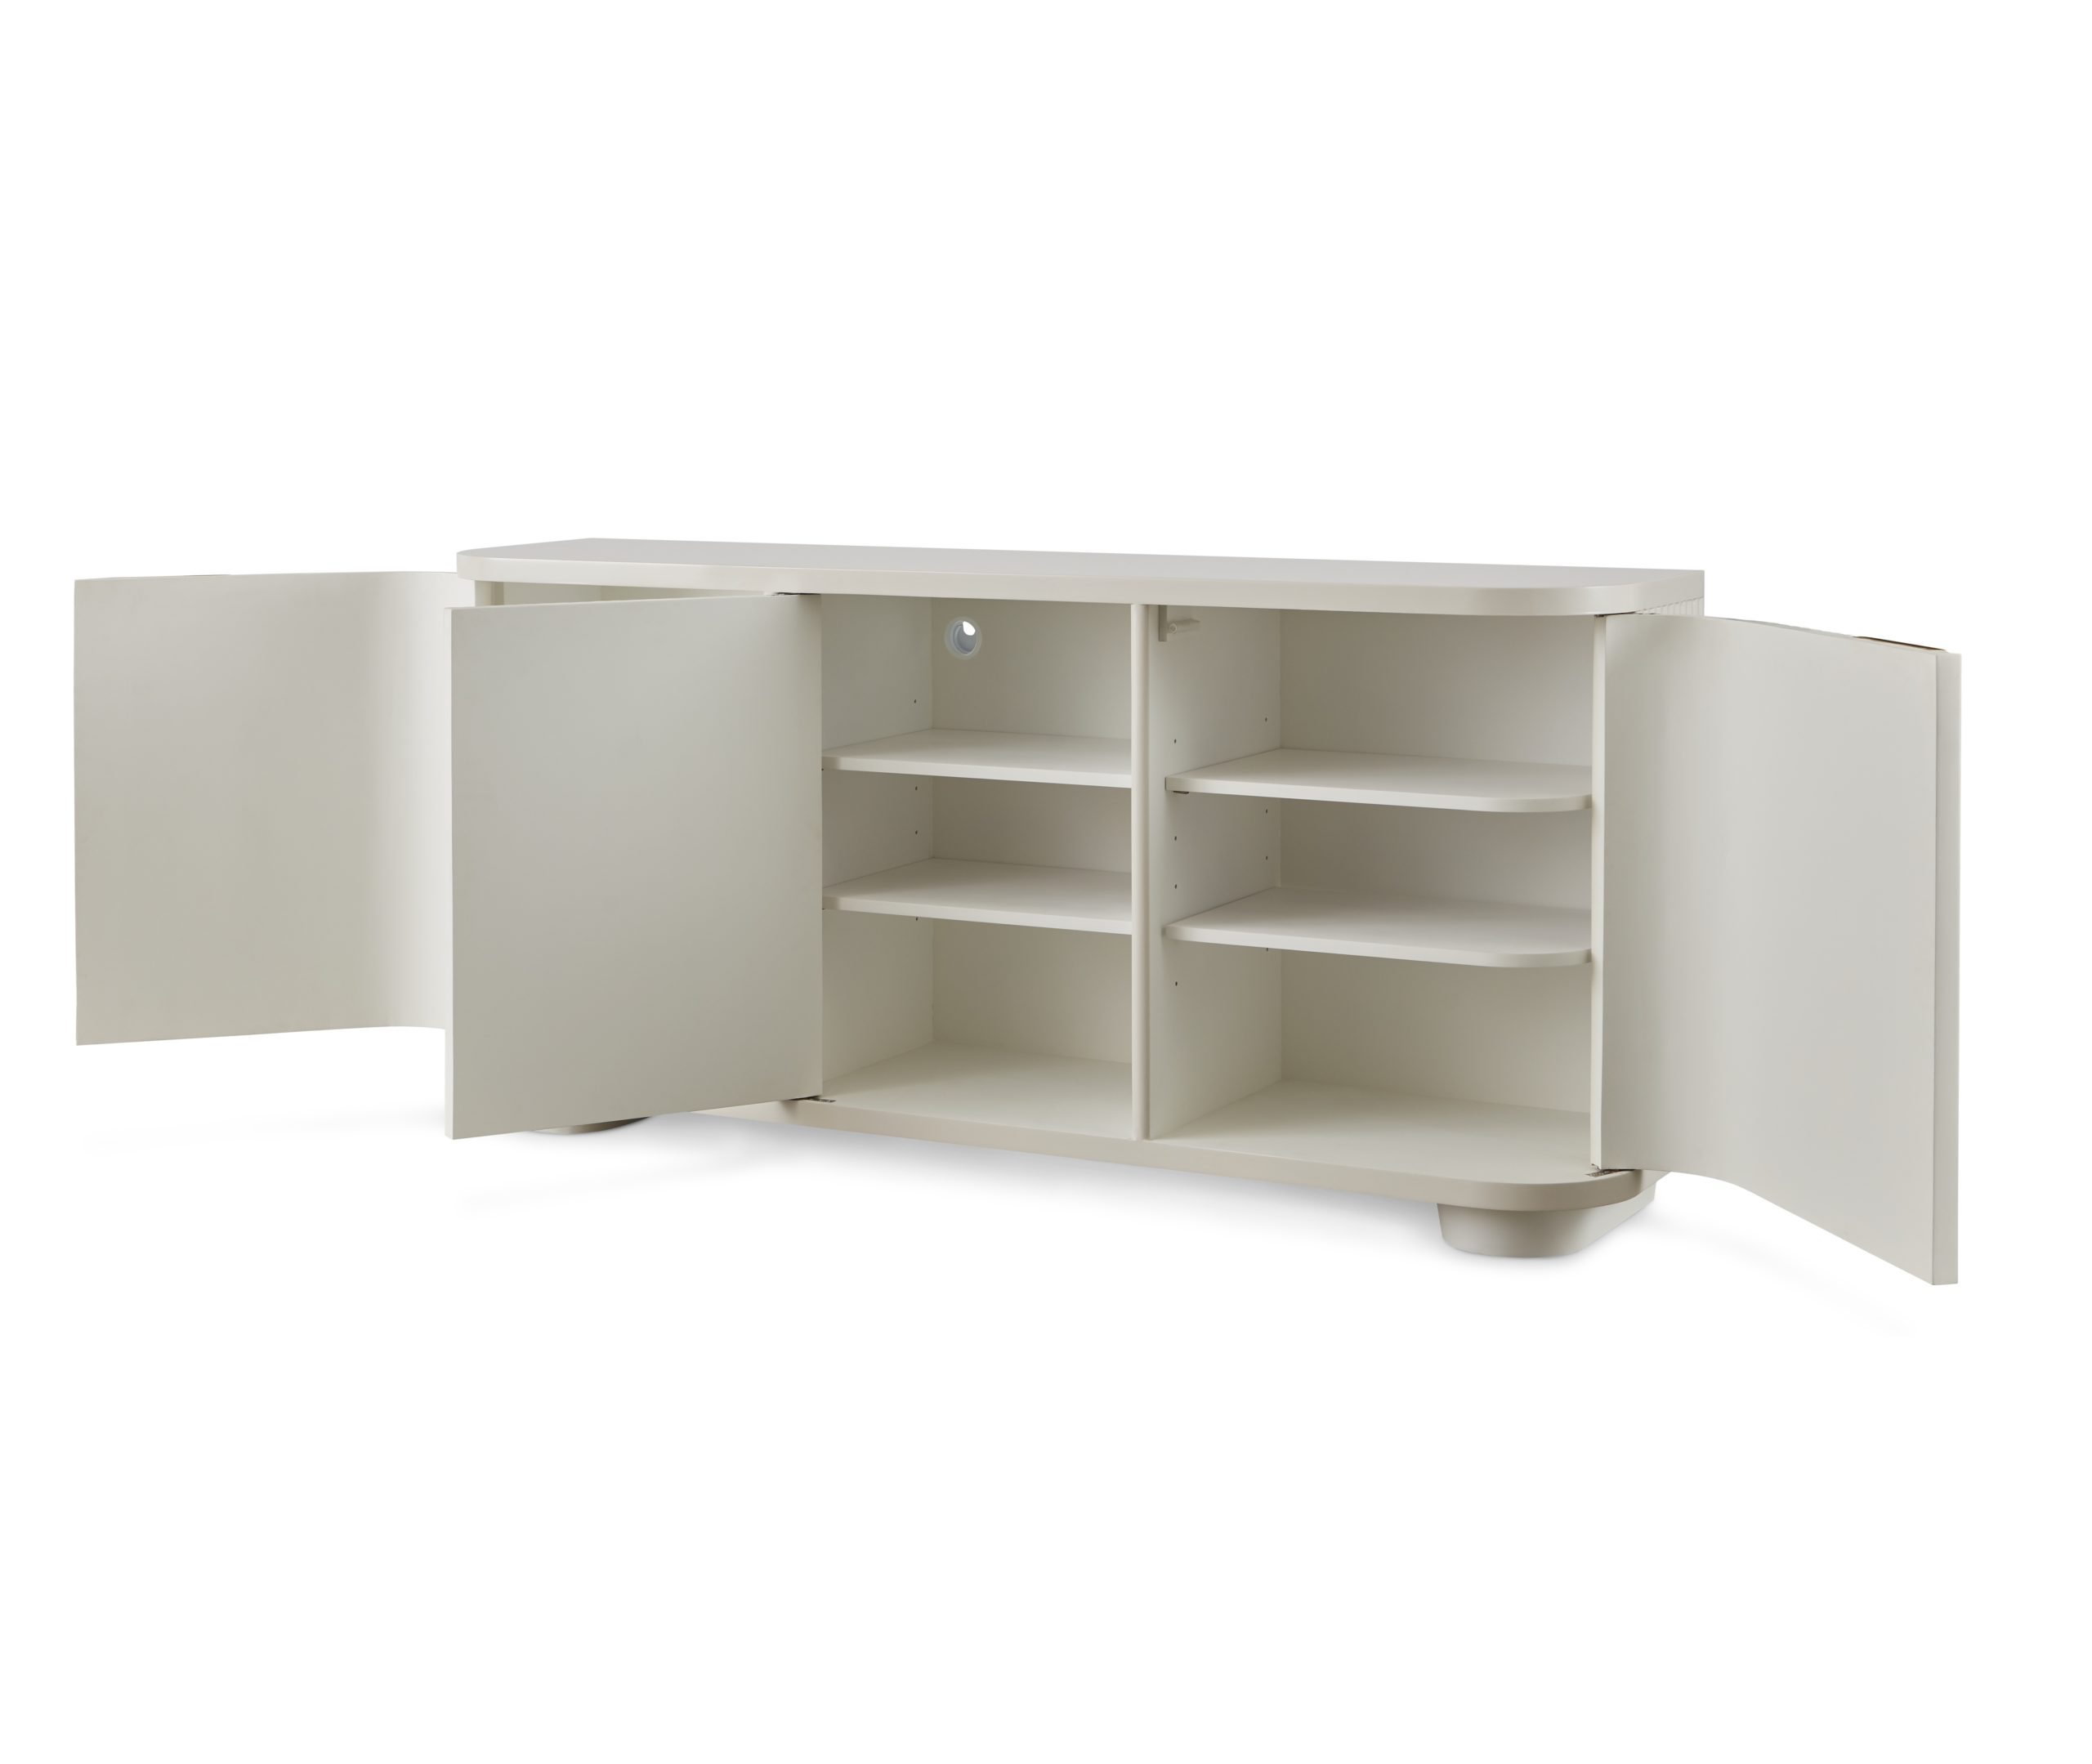 Baker_products_WNWN_harmony_credenza_BAA3275_OPEN-scaled-1